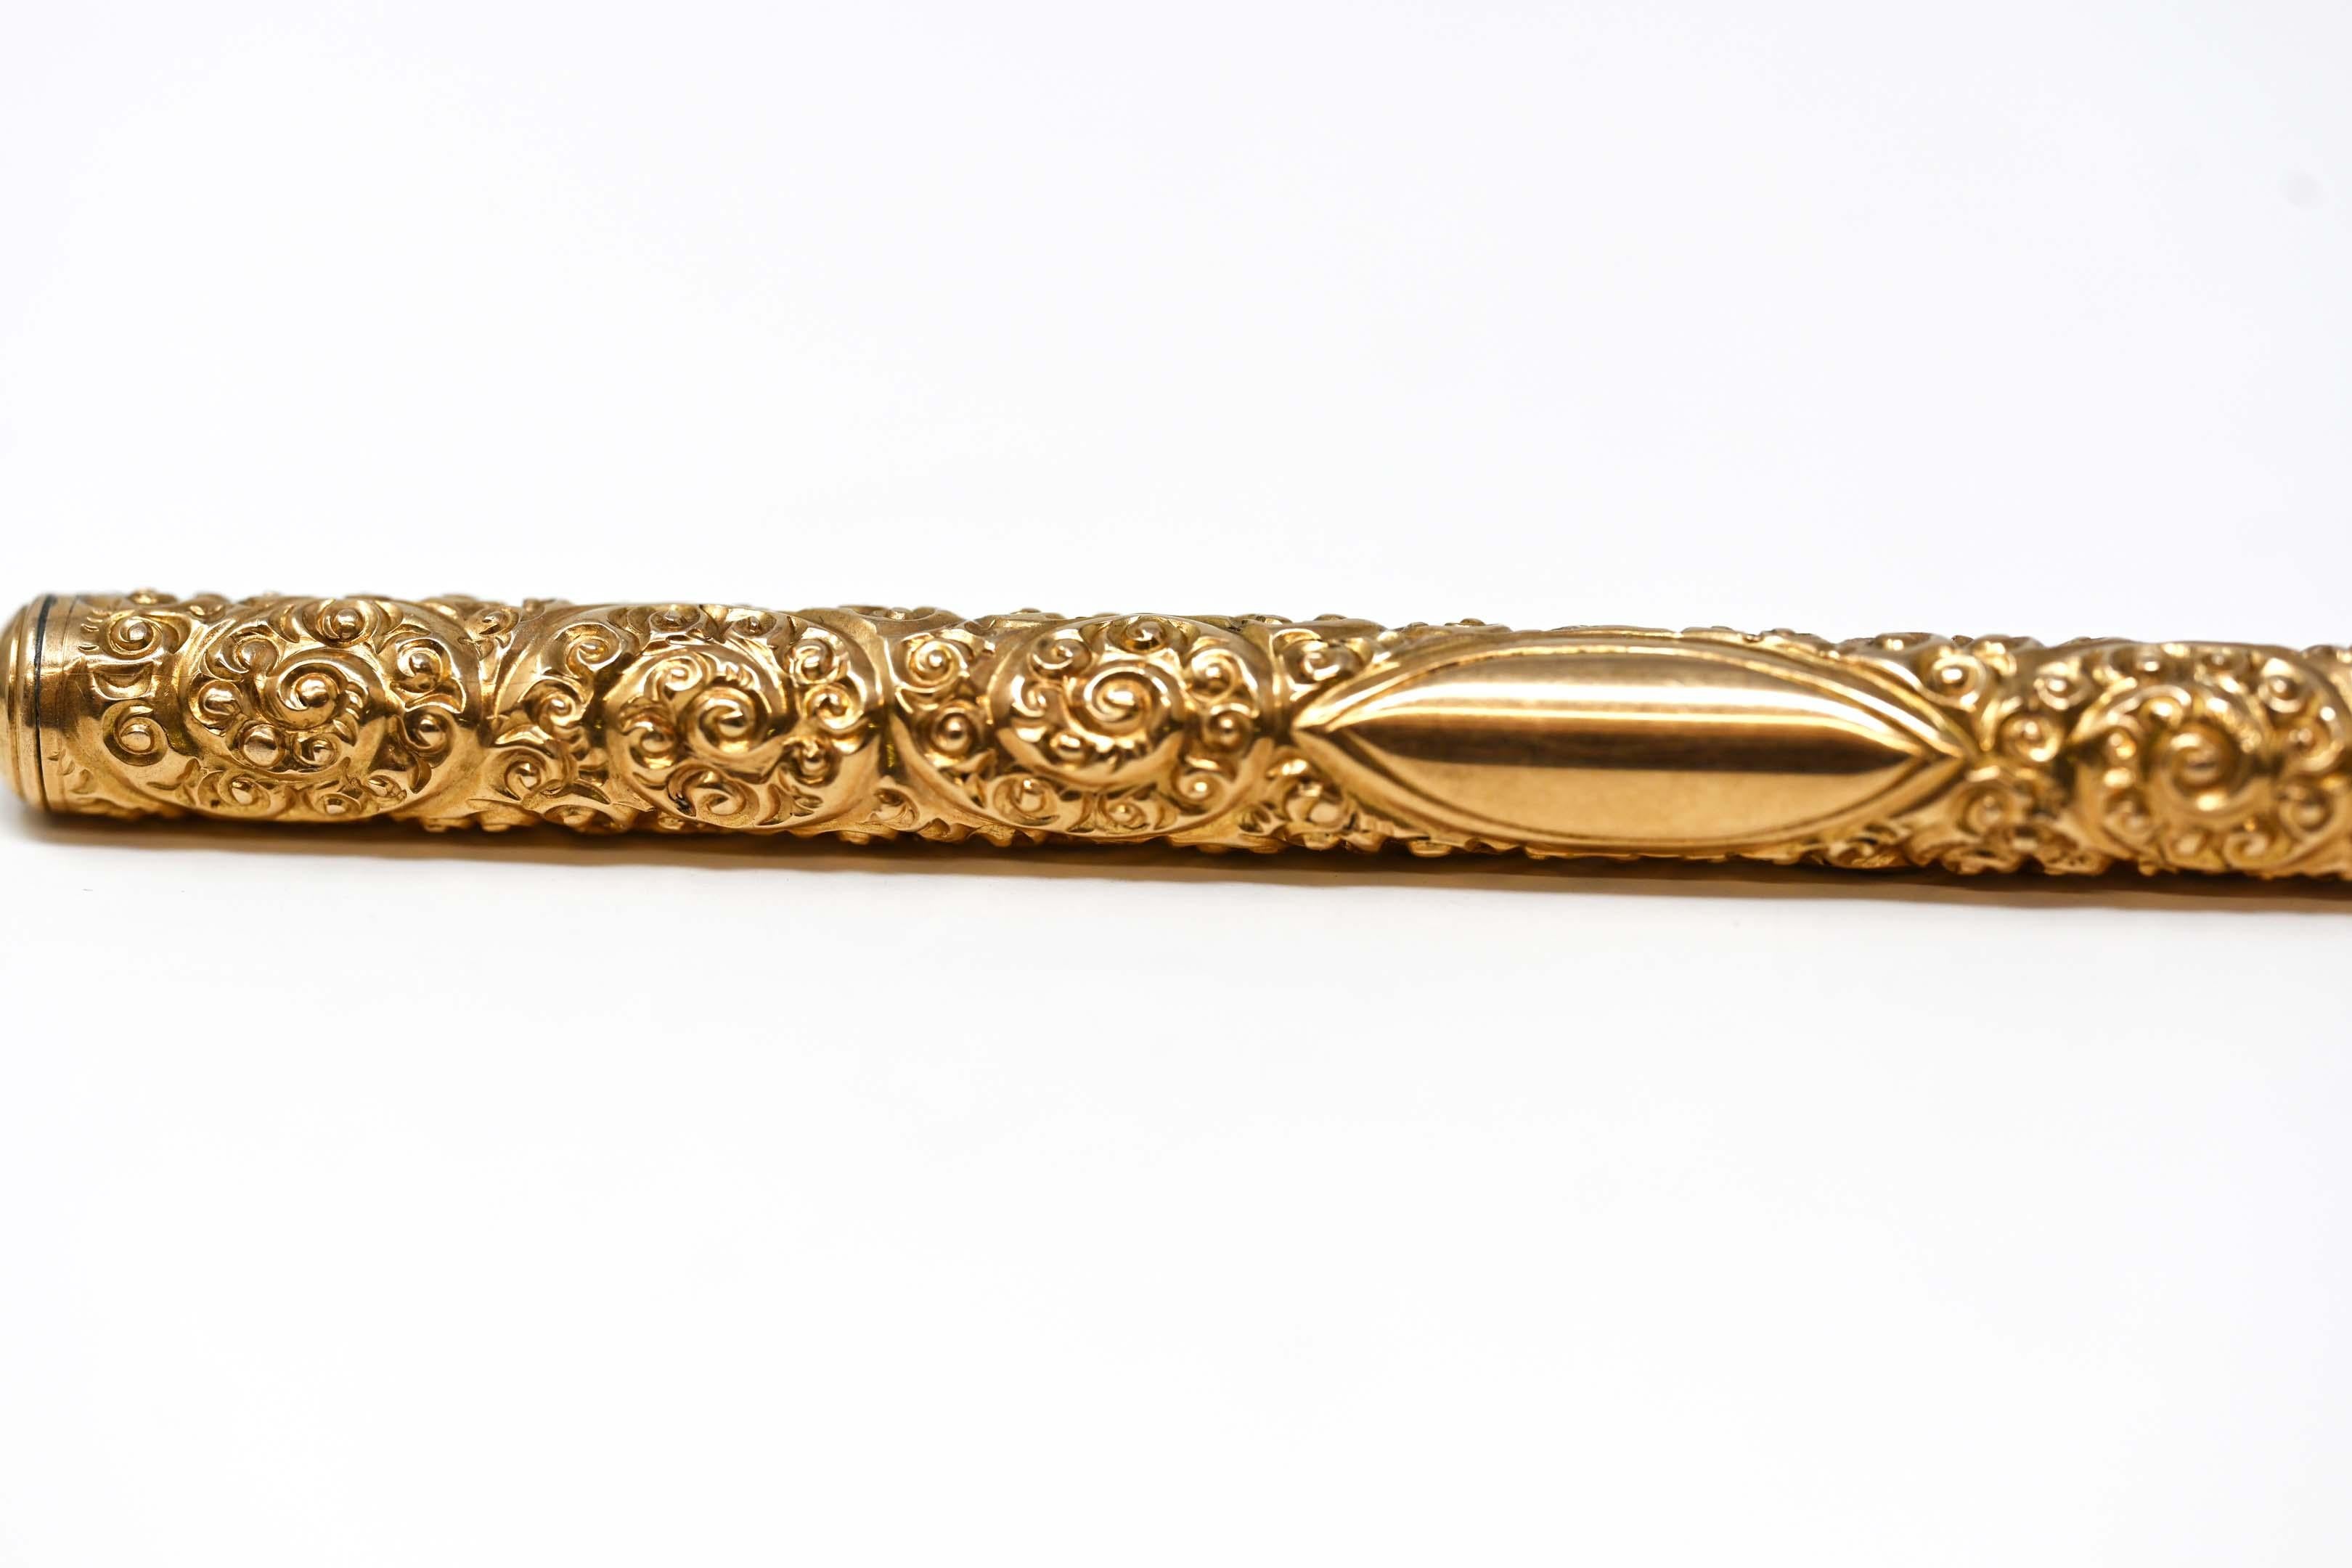 Victorian 14k yellow gold pen with elaborate chiselled work No monogram, stamped 14k, metal mechanism for refill. No maker mark, 5 1/8 inches long, in excellent condition. Missing a refill.